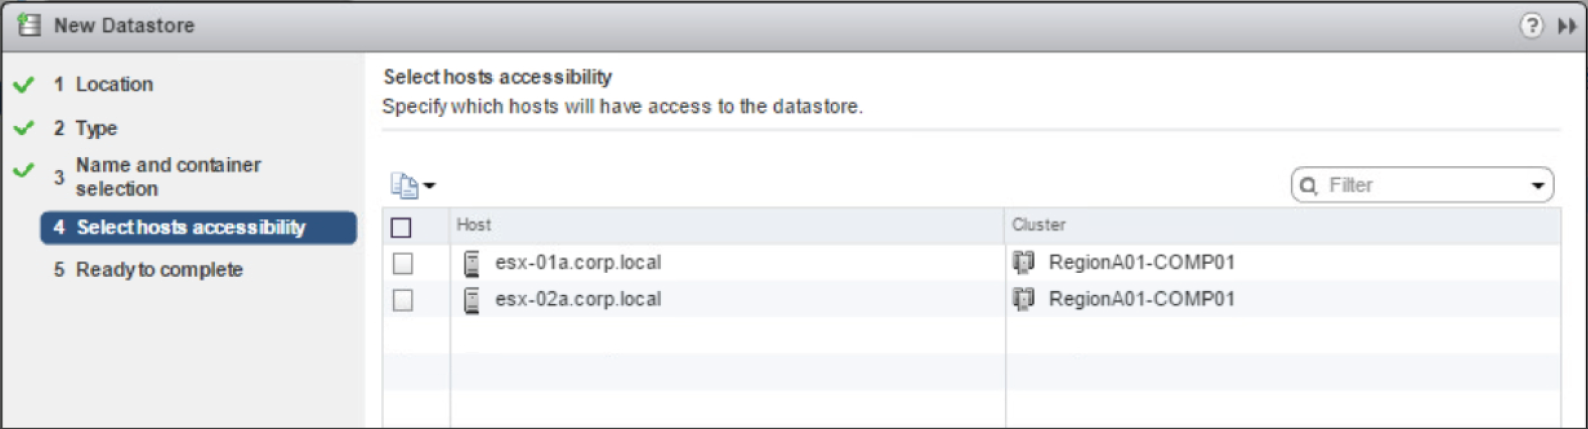 Snapshot of choosing the hosts that will access the datastore.